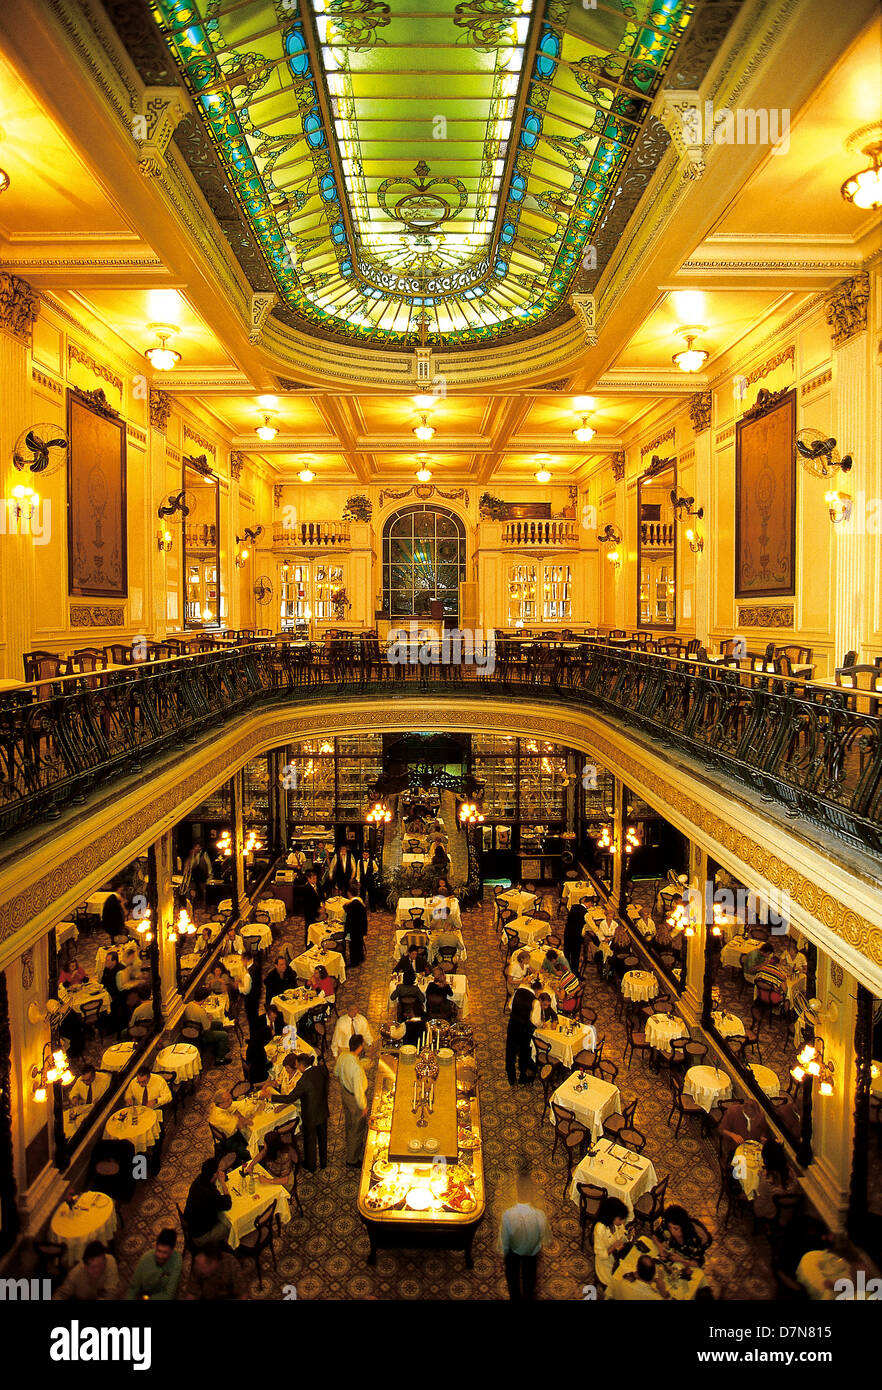 Confeitaria Colombo, traditional candy store and restaurant in downtown Rio de Janeiro, Brazil. Art Nouveau architecture. Stock Photo